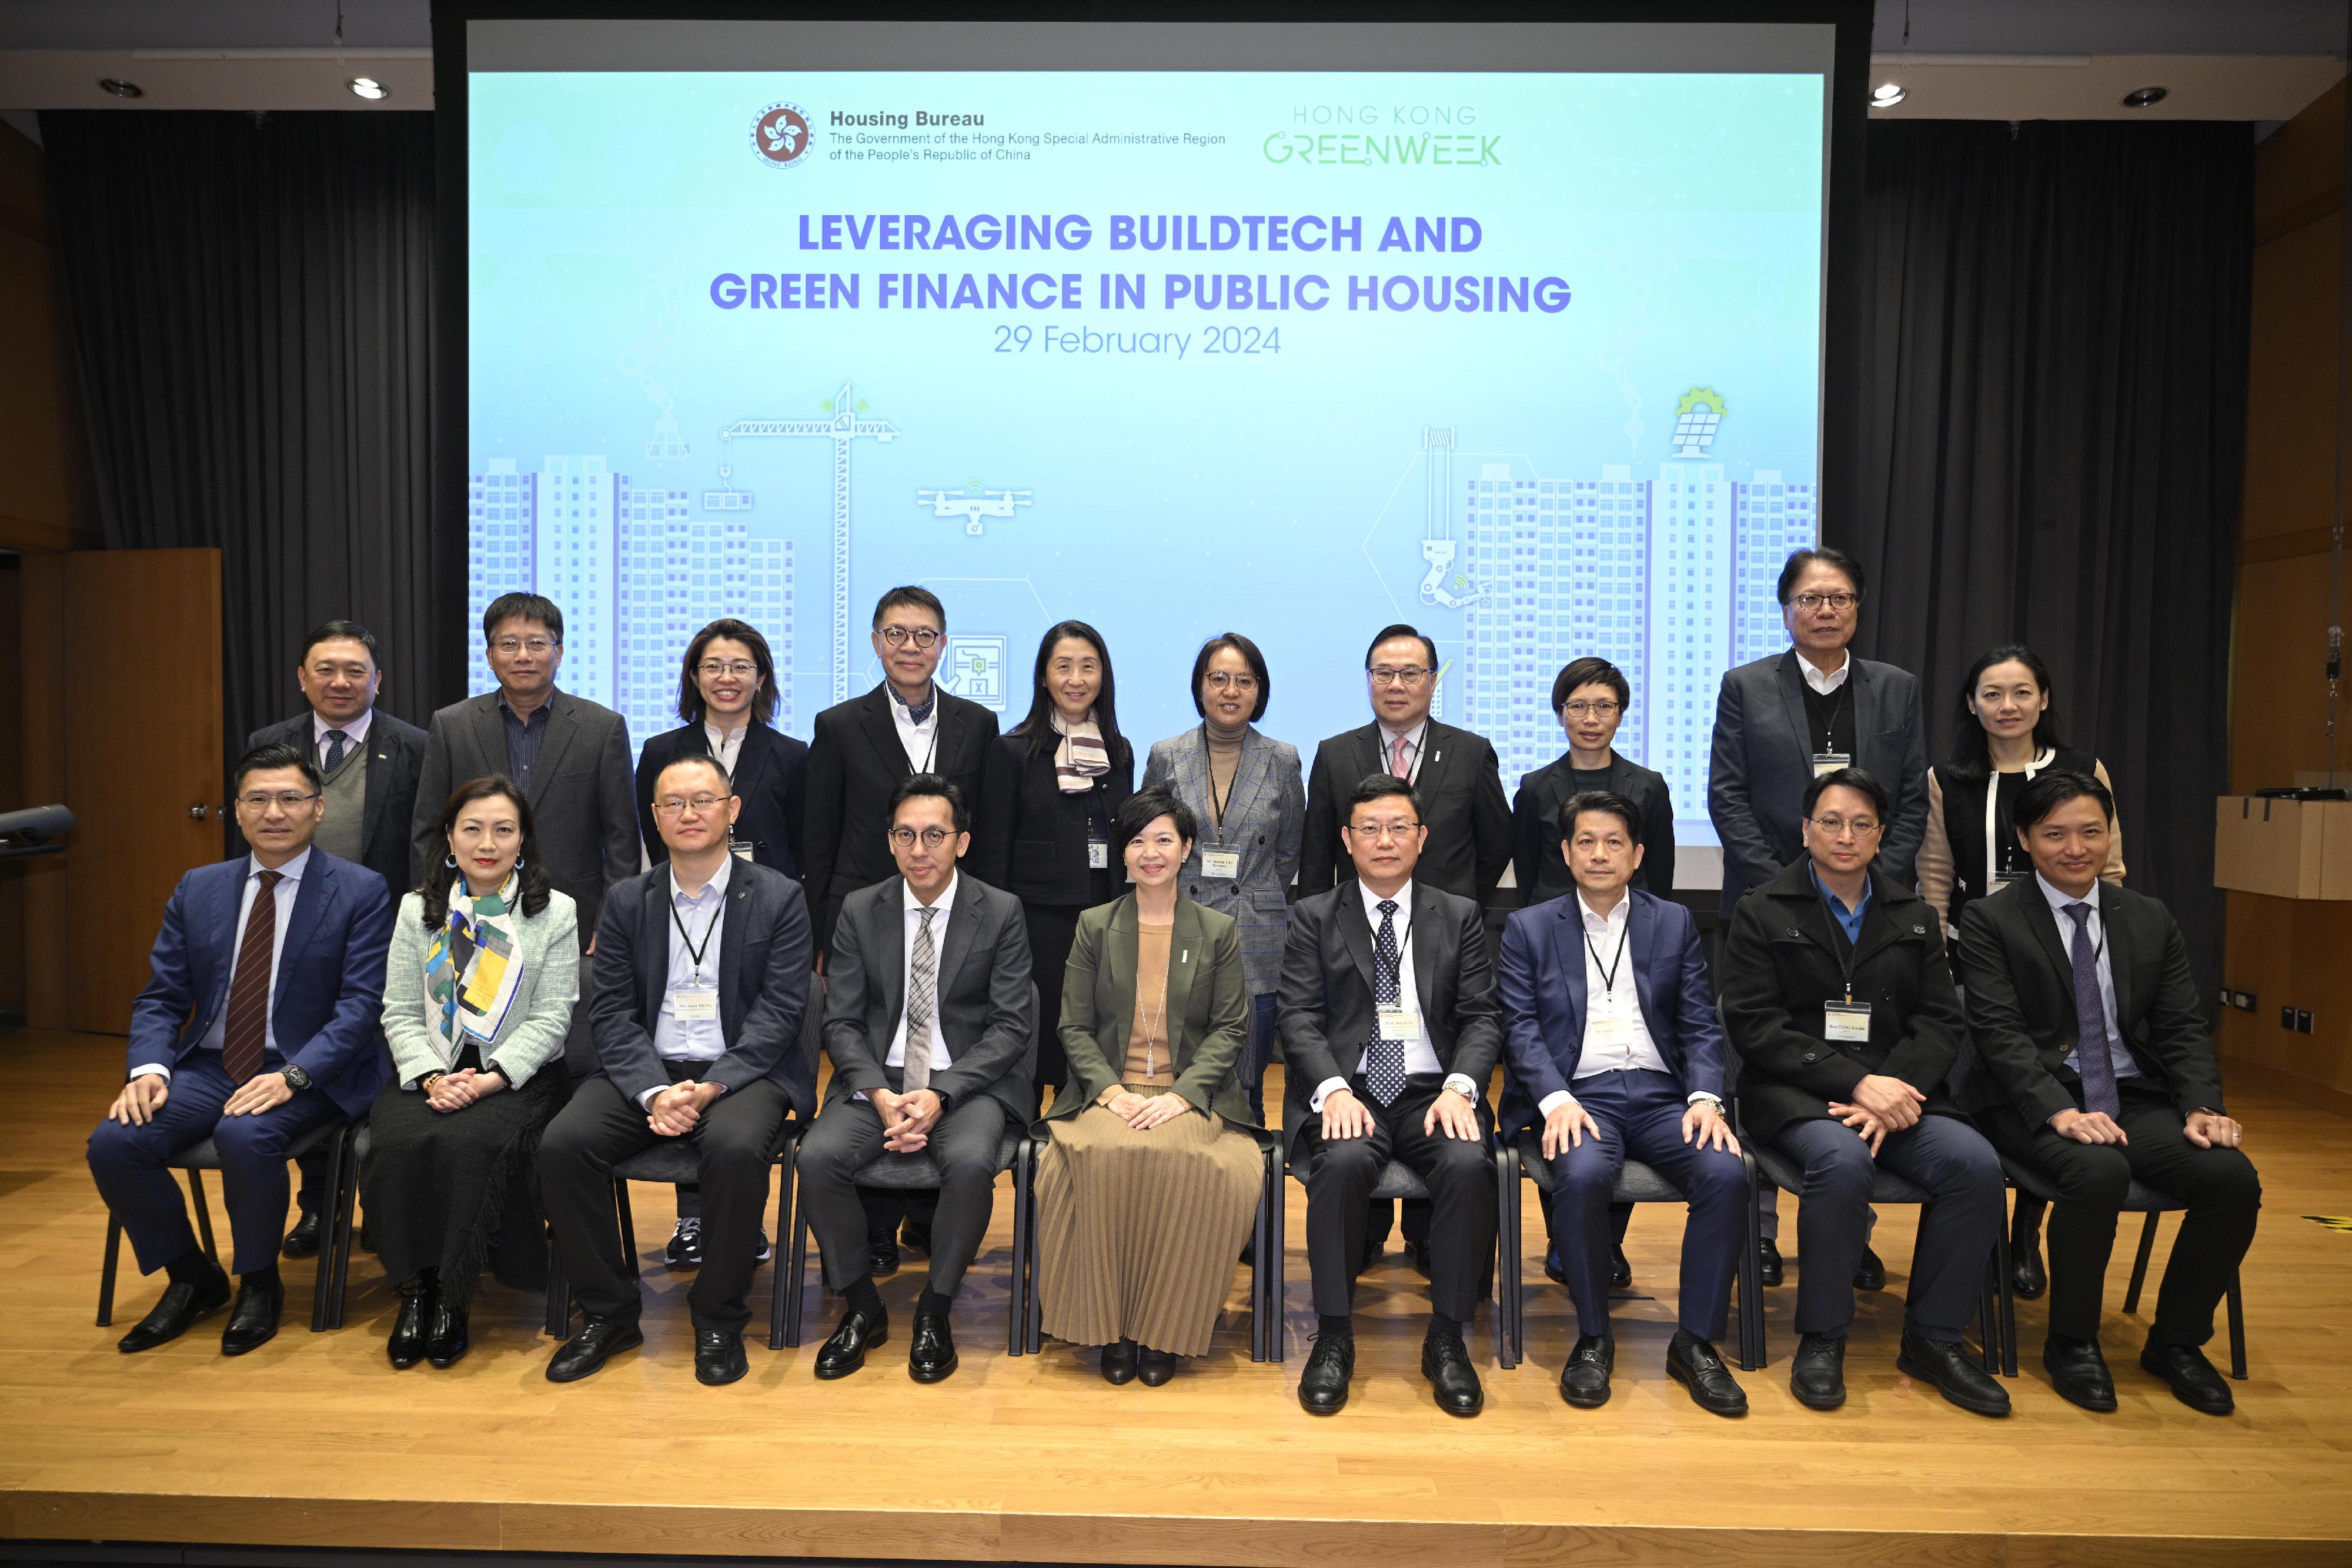 To support Hong Kong Green Week and the Government's initiative in promoting a green economy for sustainable development, the Housing Bureau organised a seminar themed "Leveraging BuildTech and Green Finance in Public Housing" today (February 29). Photo shows the Secretary for Housing, Ms Winnie Ho (front row, centre), with guest speakers including the Assistant Director (Development and Procurement) of the Housing Department, Mr Daniel Leung (front row, fourth left); the Head of the Department of Civil Engineering at the University of Hong Kong, Professor Pan Wei (front row, fourth right); the Chief Executive Officer of DaFang Intelligent Technology Company Limited, Mr Andy Deng (front row, third left); Director of Gammon Construction Limited Mr Partick Hou (front row, third right); the Vice Chairman of Yau Lee Holdings Limited, Dr Conrad Wong (back row, second left), and other guests. 